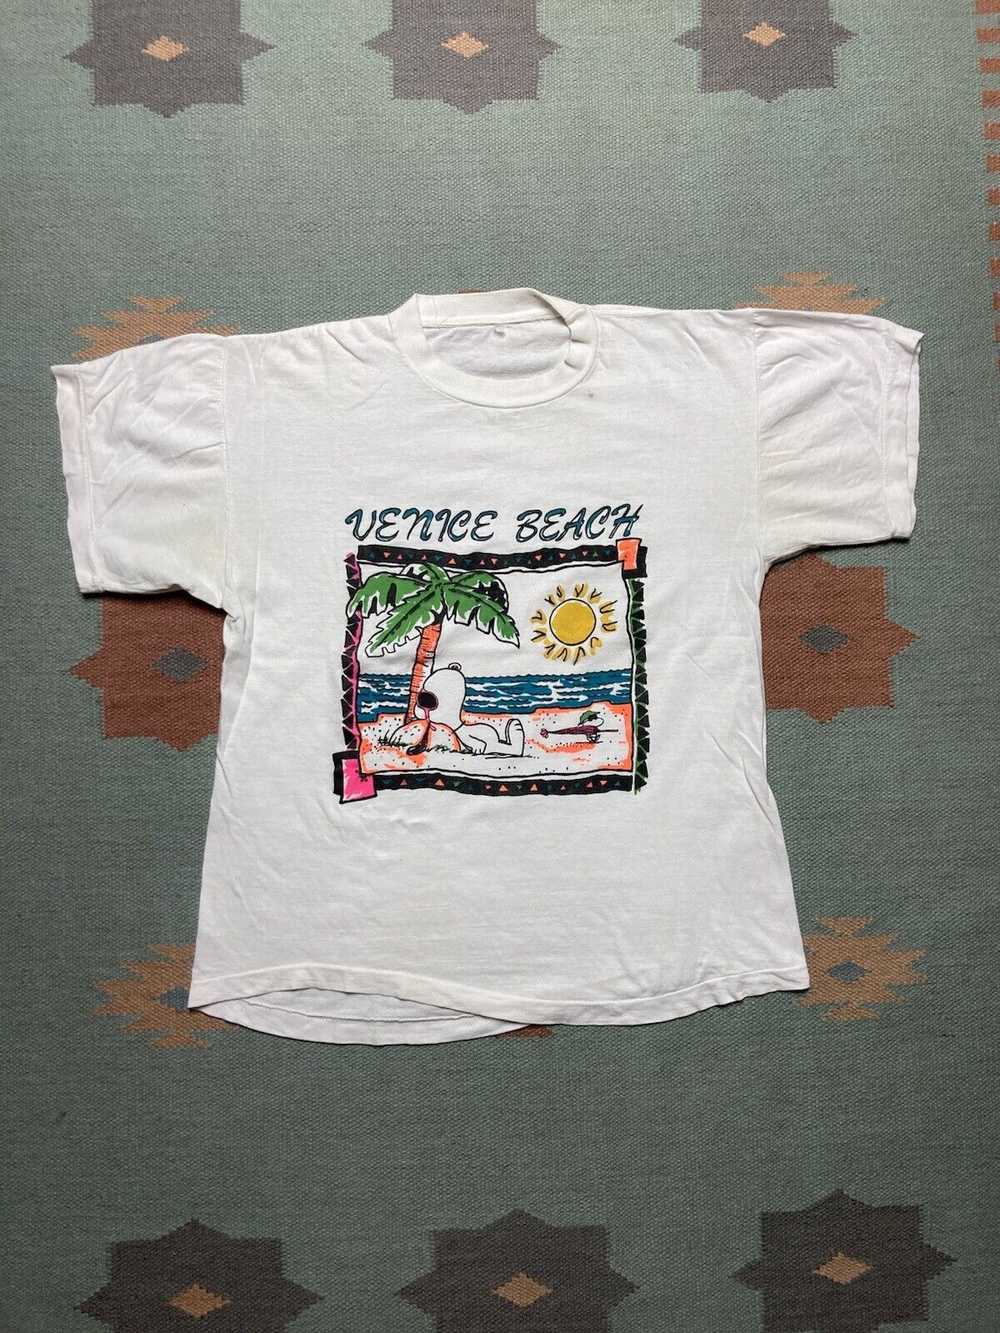 Made In Usa × Peanuts × Vintage VTG 80s t shirt s… - image 1